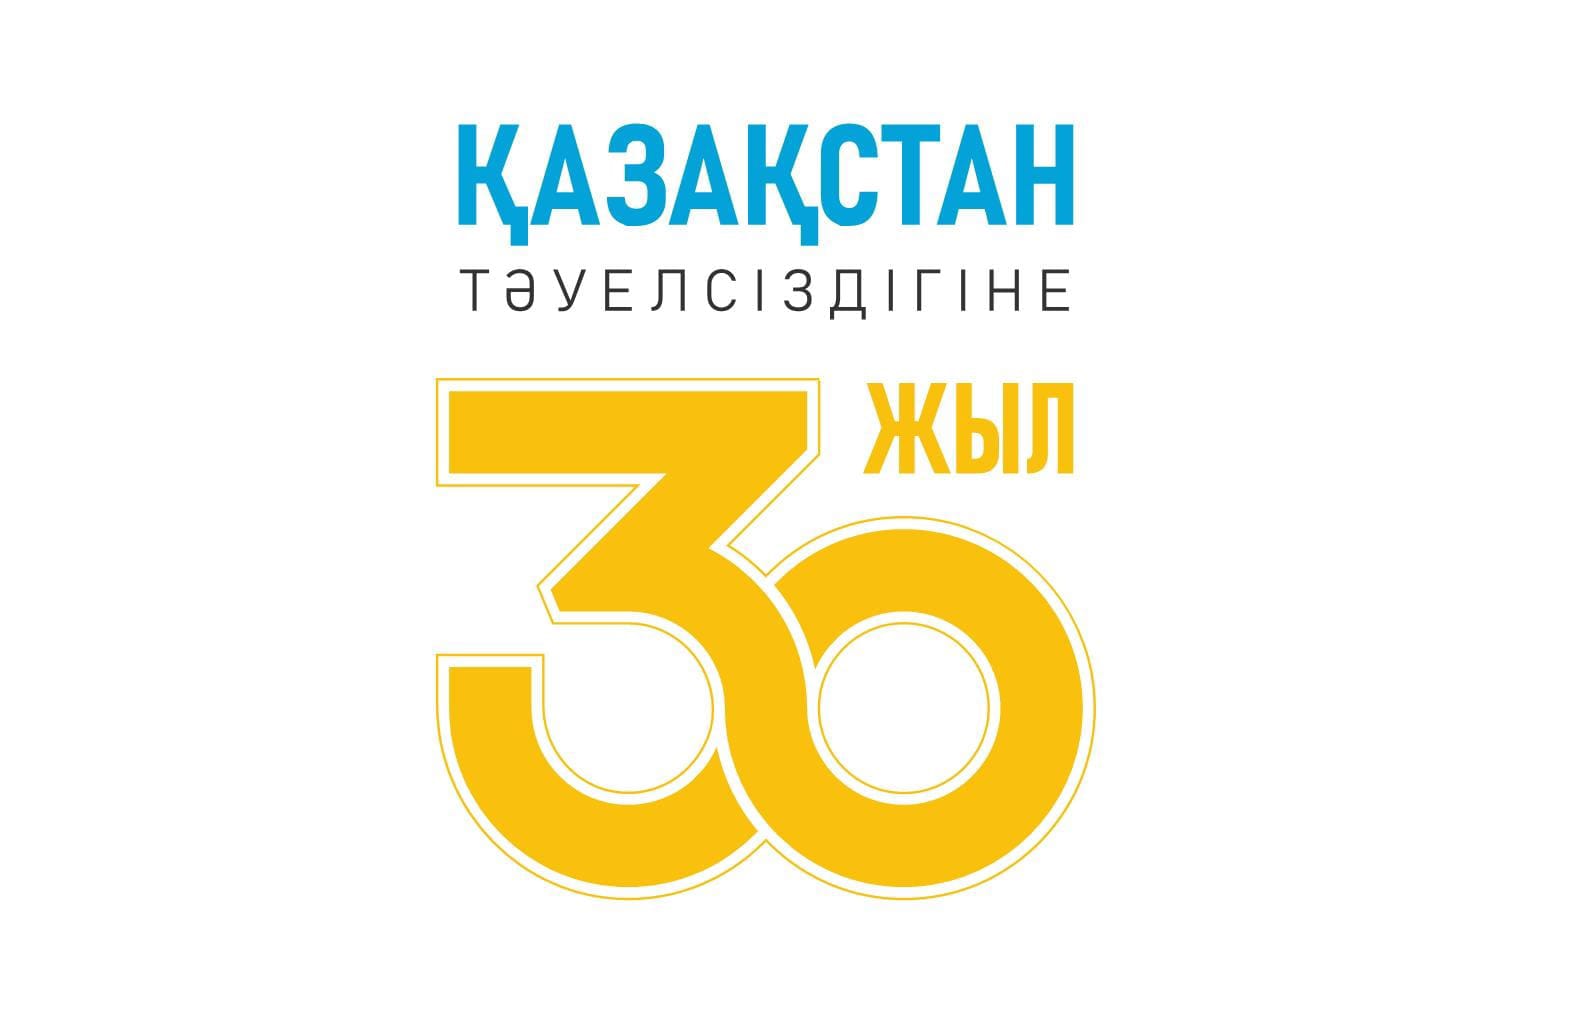 30 years of Independence of Kazakhstan